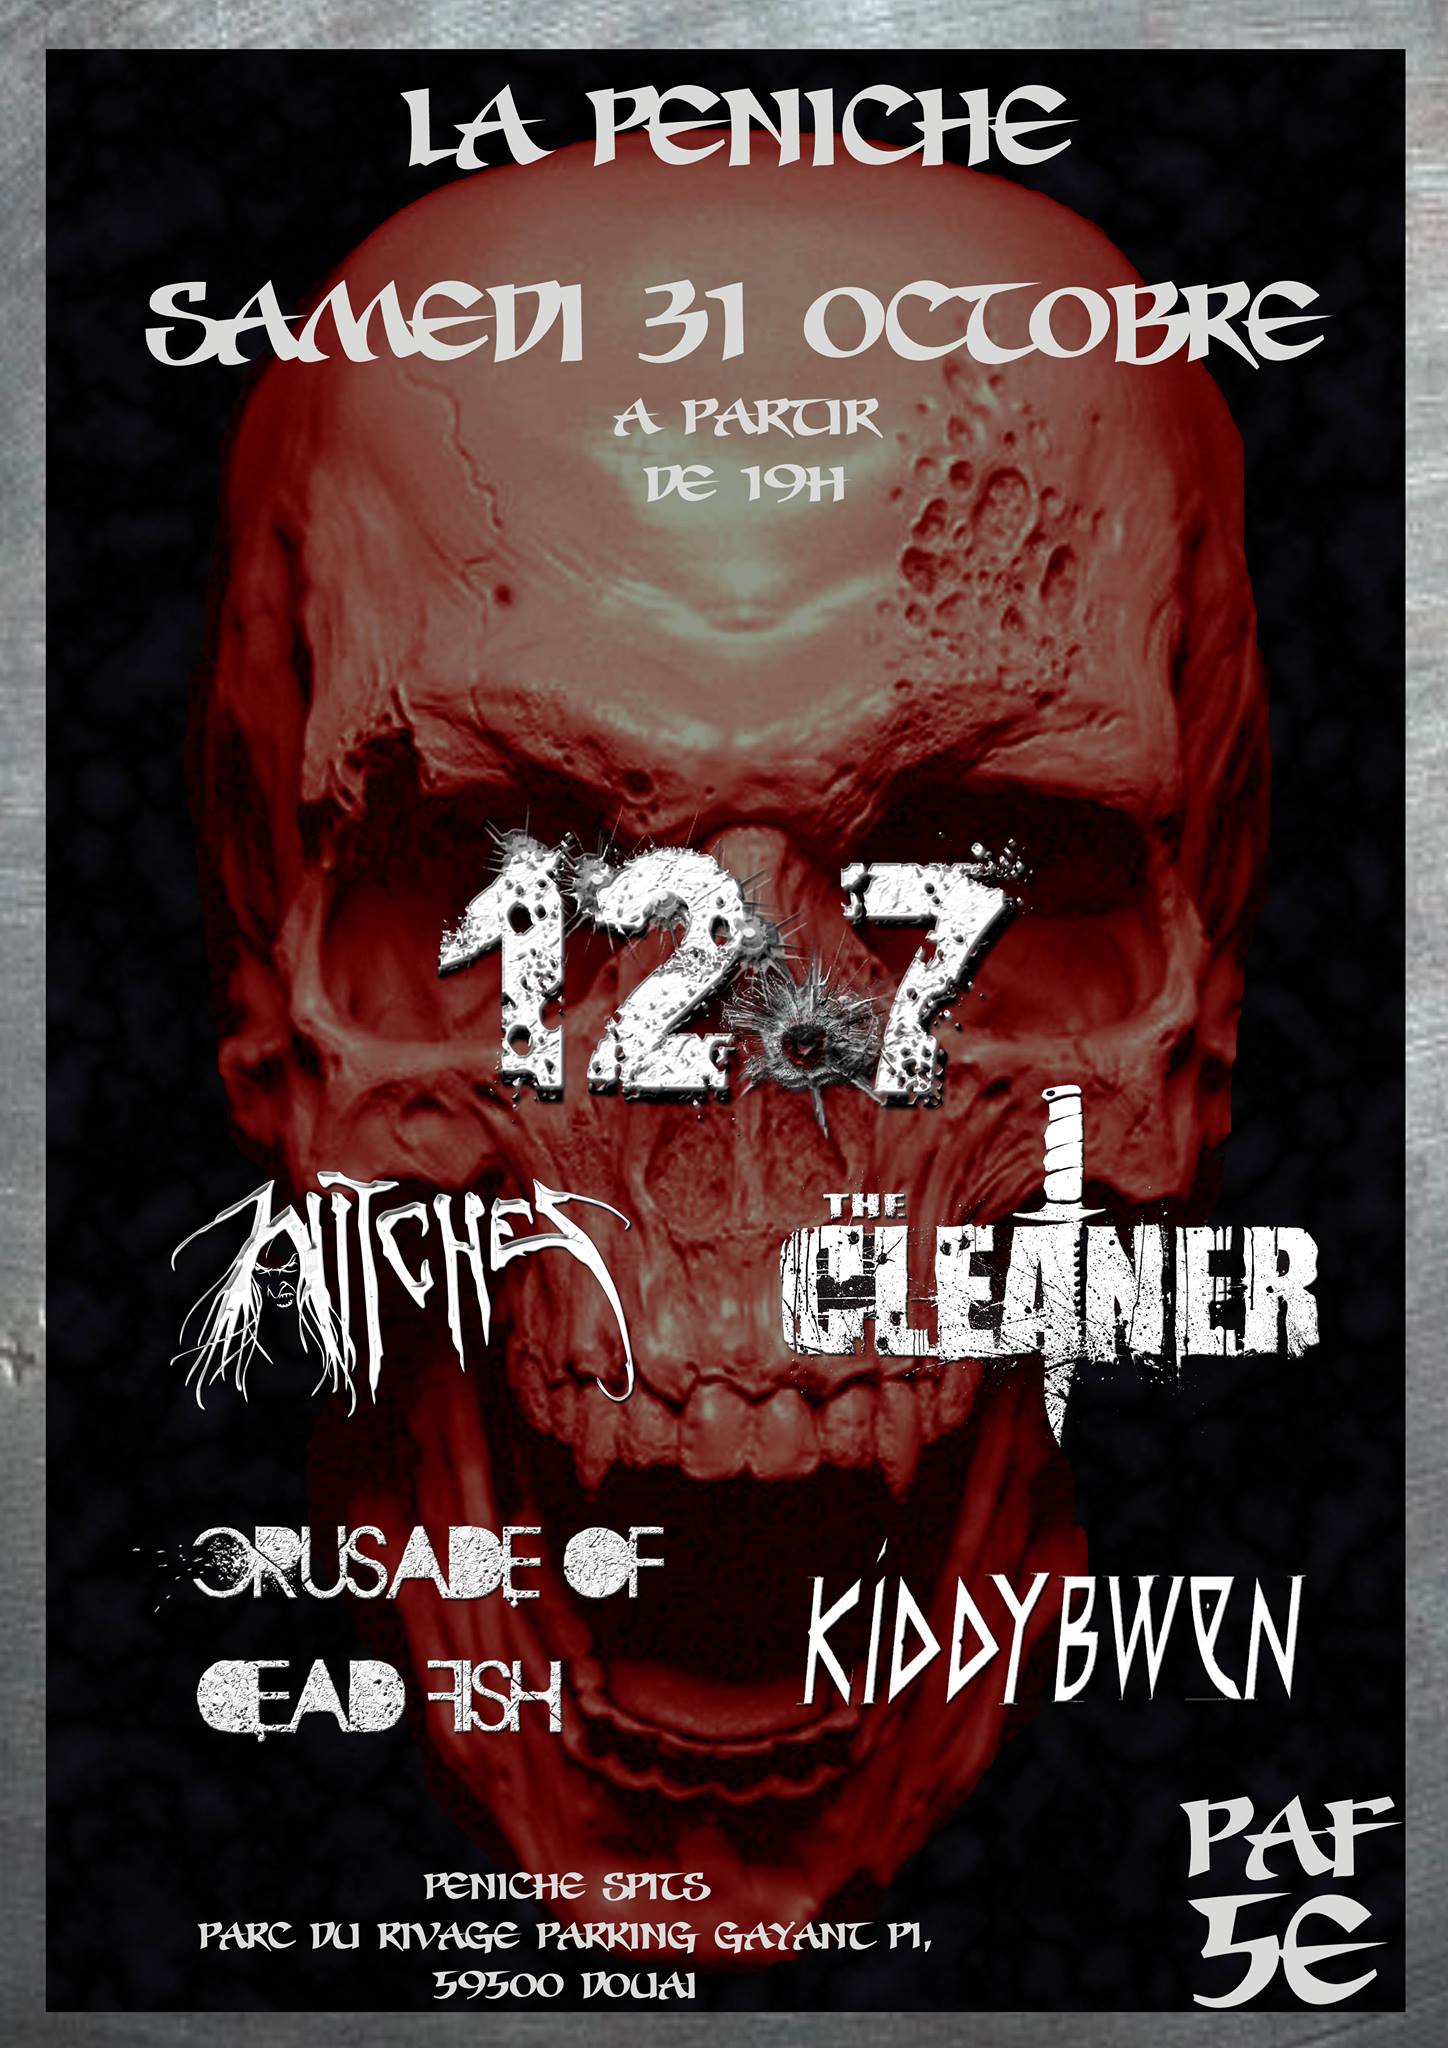 Witches flyer 12.7 + Witches + The Cleaner + Crusade of Dead Fish + Kiddybwen @ European Tour La P�niche Igelrock Douai (62), France